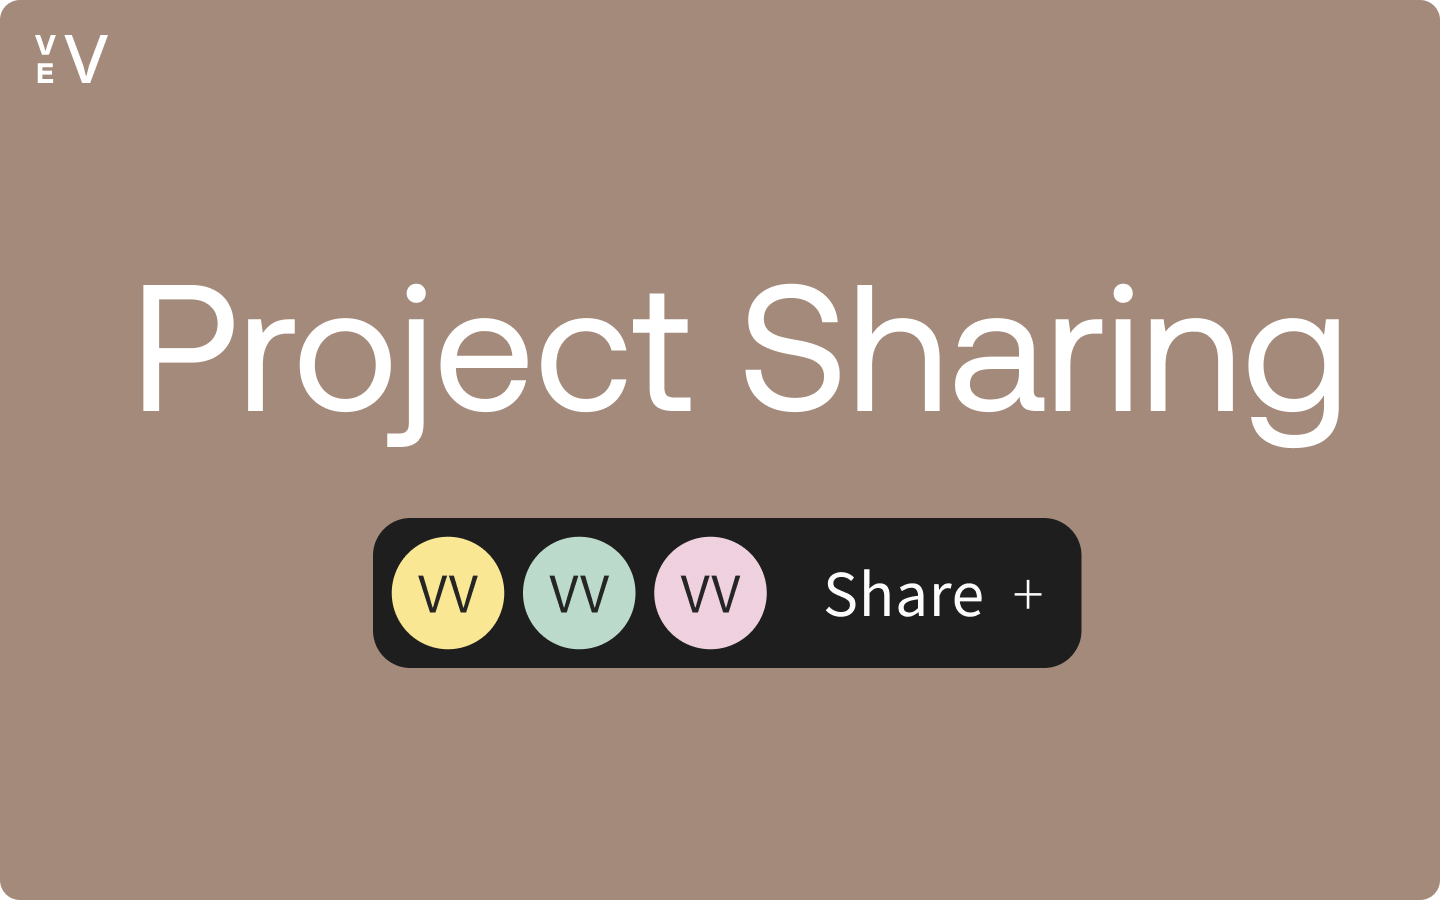 What's New: Project Sharing